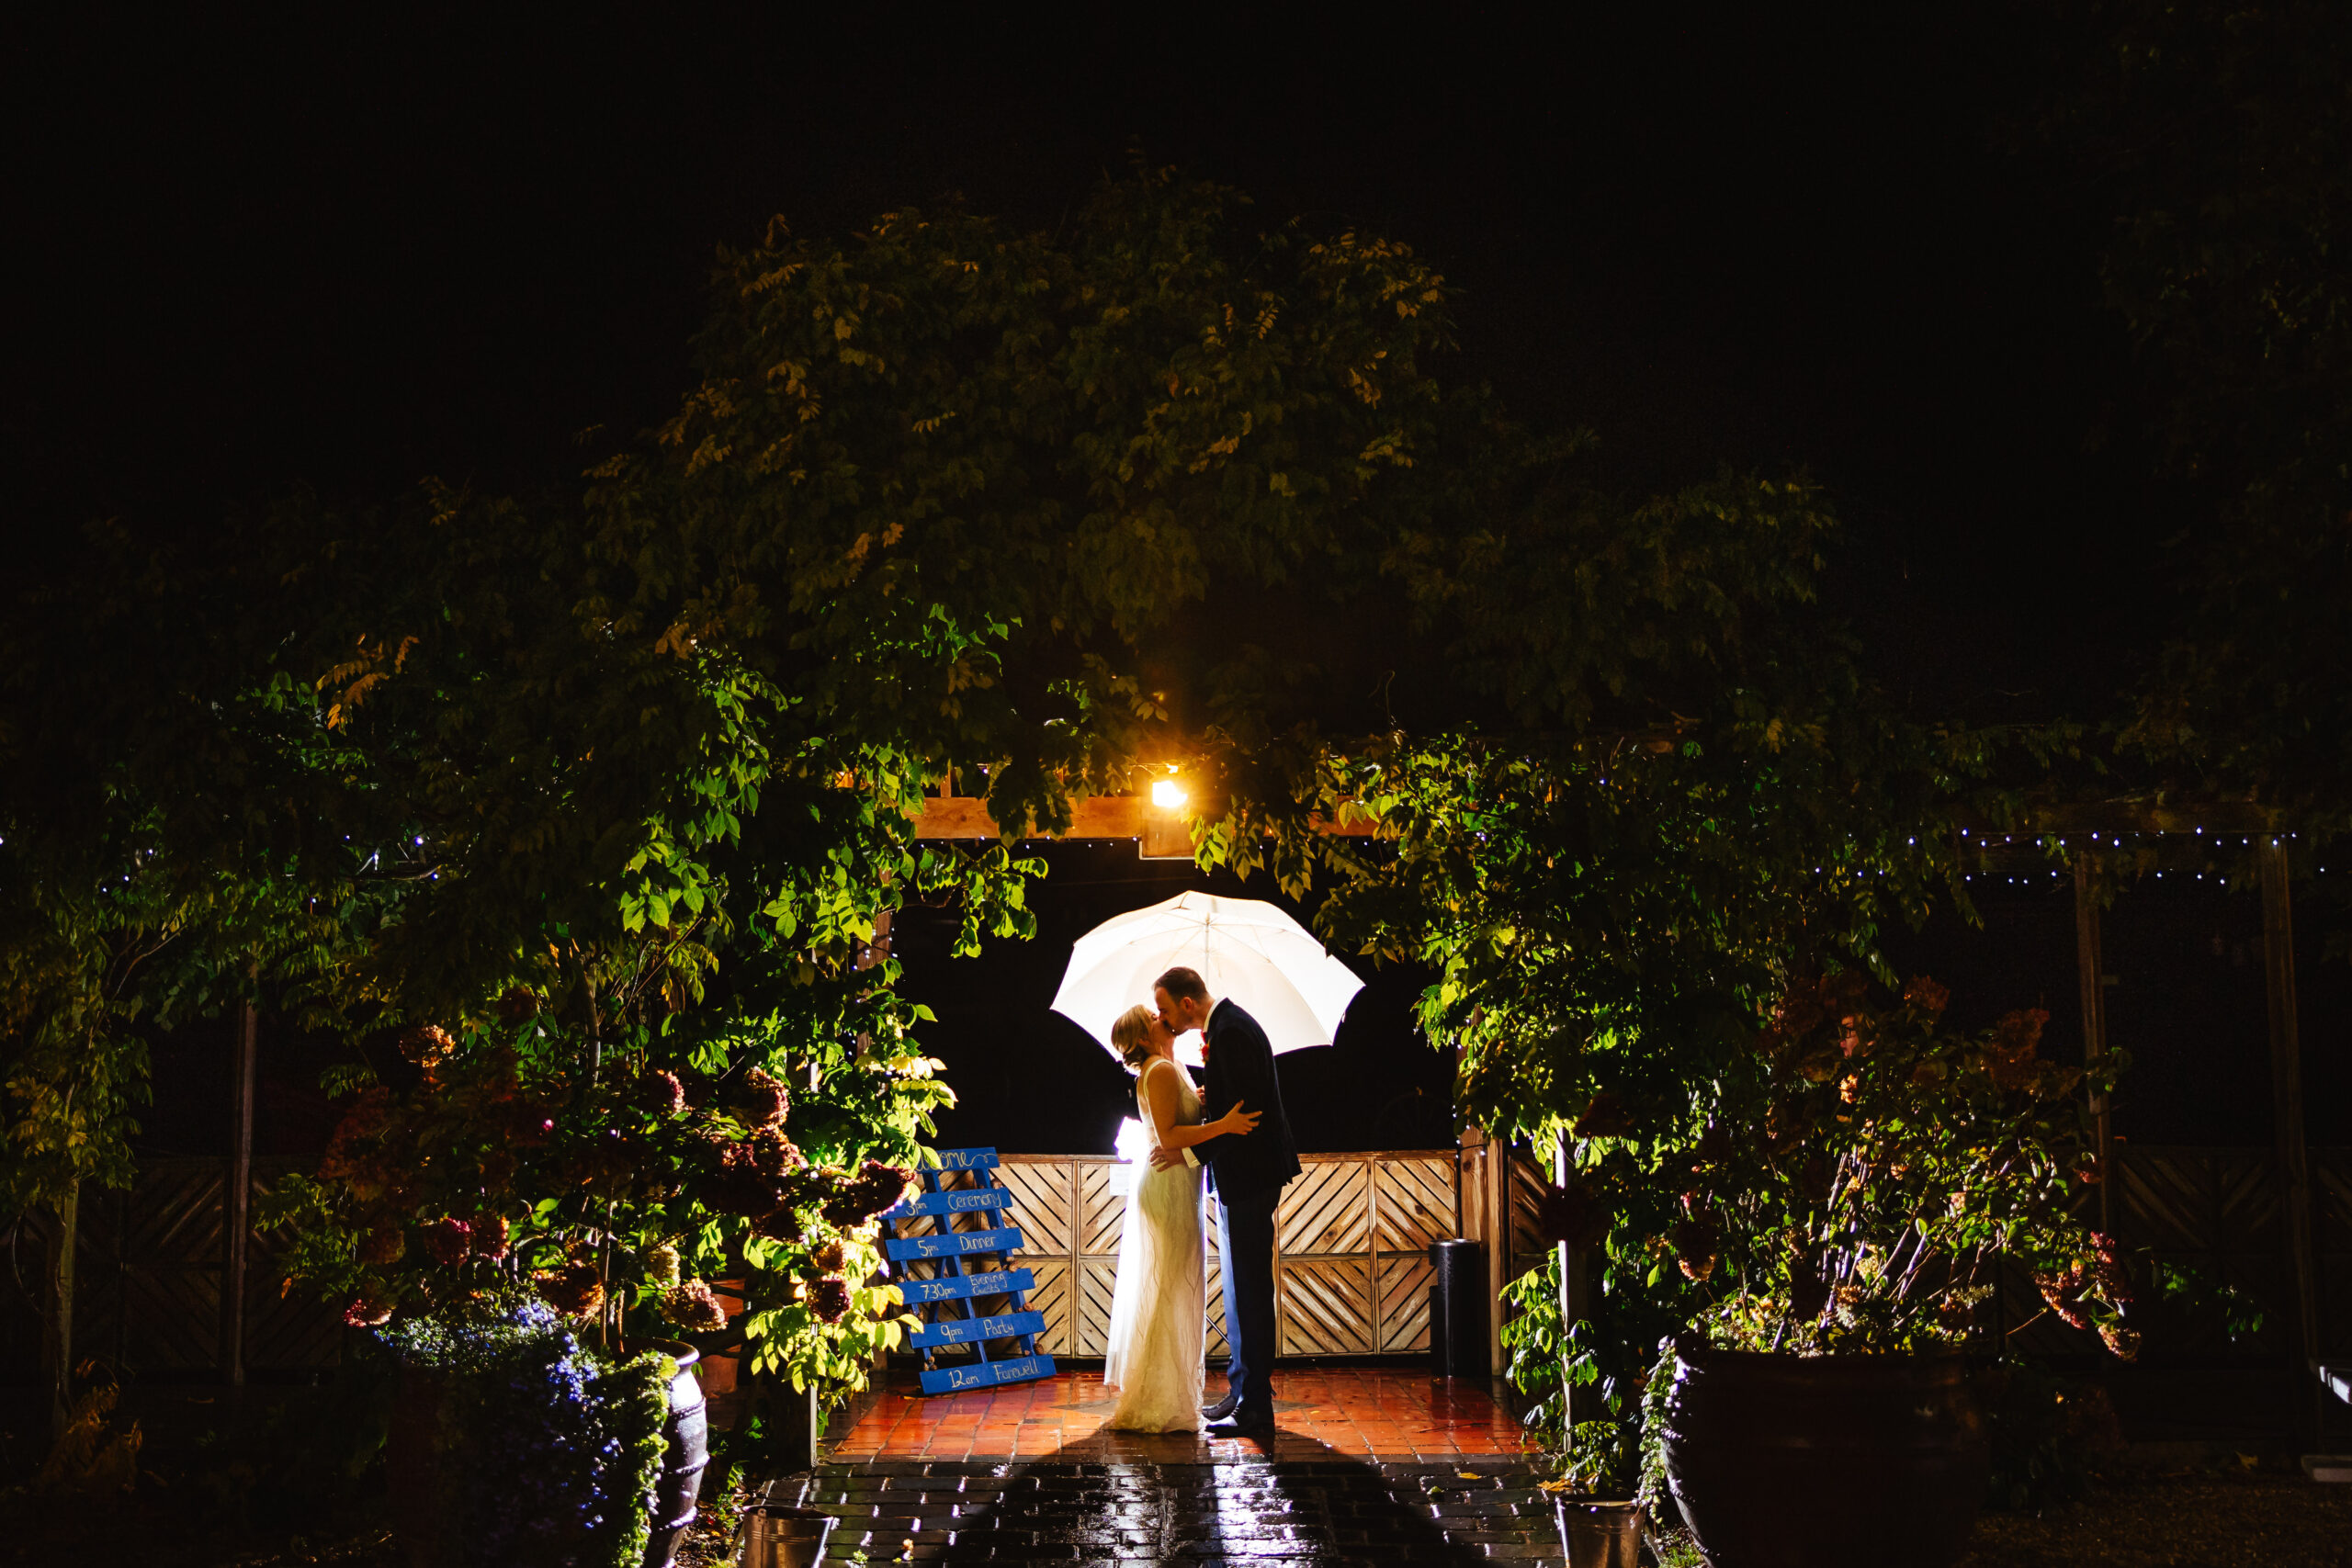 backlit barn entrance at south farm wedding, bride and groom have an umbrella and it is raining